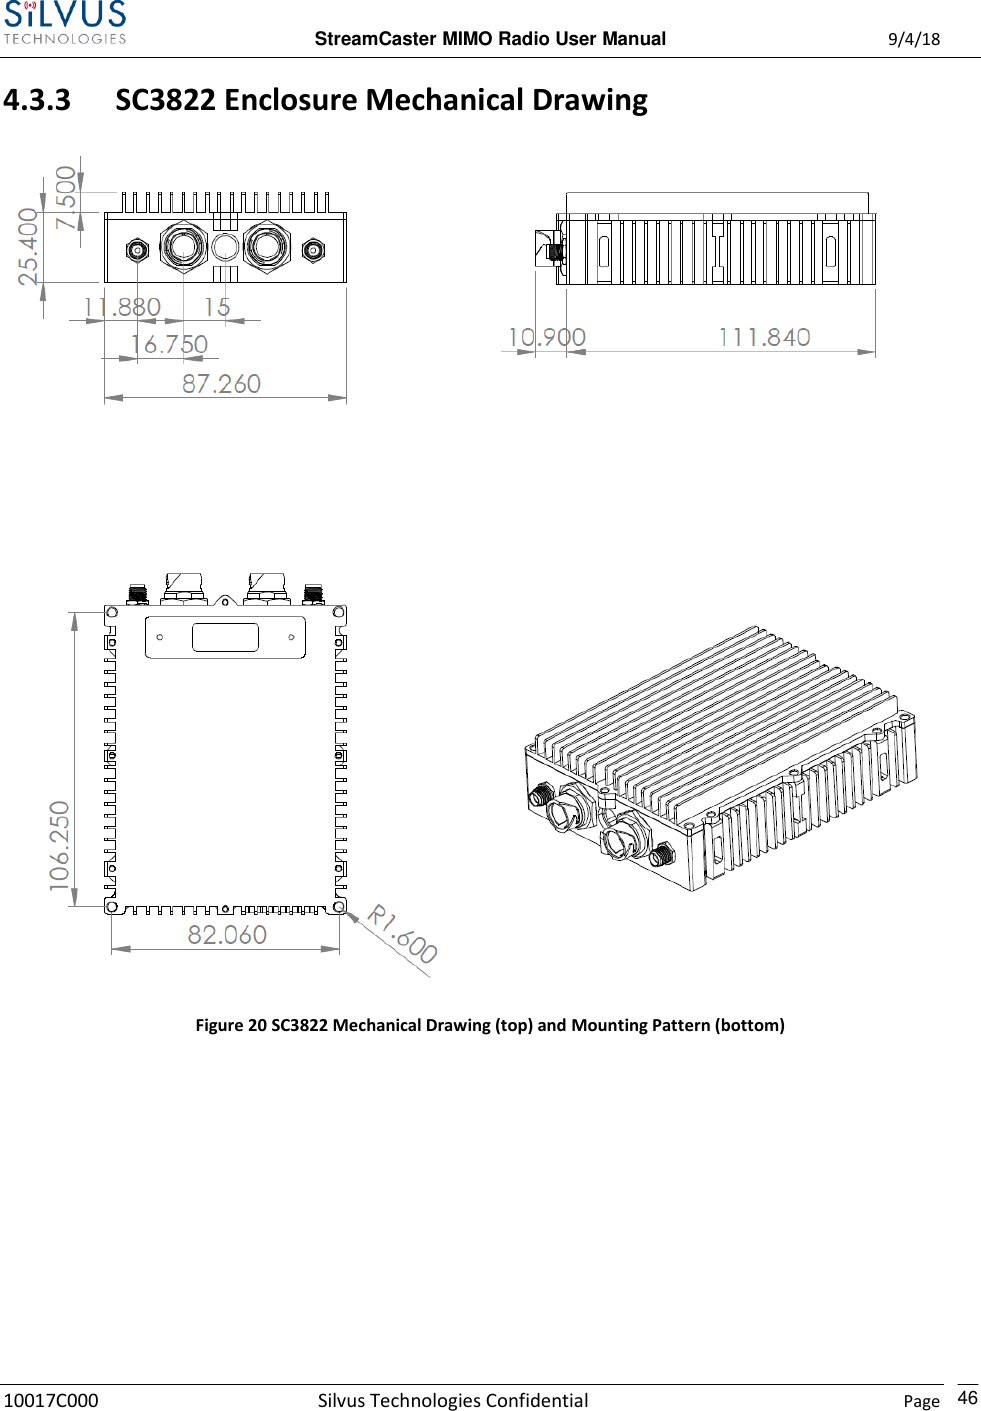  StreamCaster MIMO Radio User Manual  9/4/18 10017C000 Silvus Technologies Confidential    Page    46 4.3.3 SC3822 Enclosure Mechanical Drawing   Figure 20 SC3822 Mechanical Drawing (top) and Mounting Pattern (bottom)  